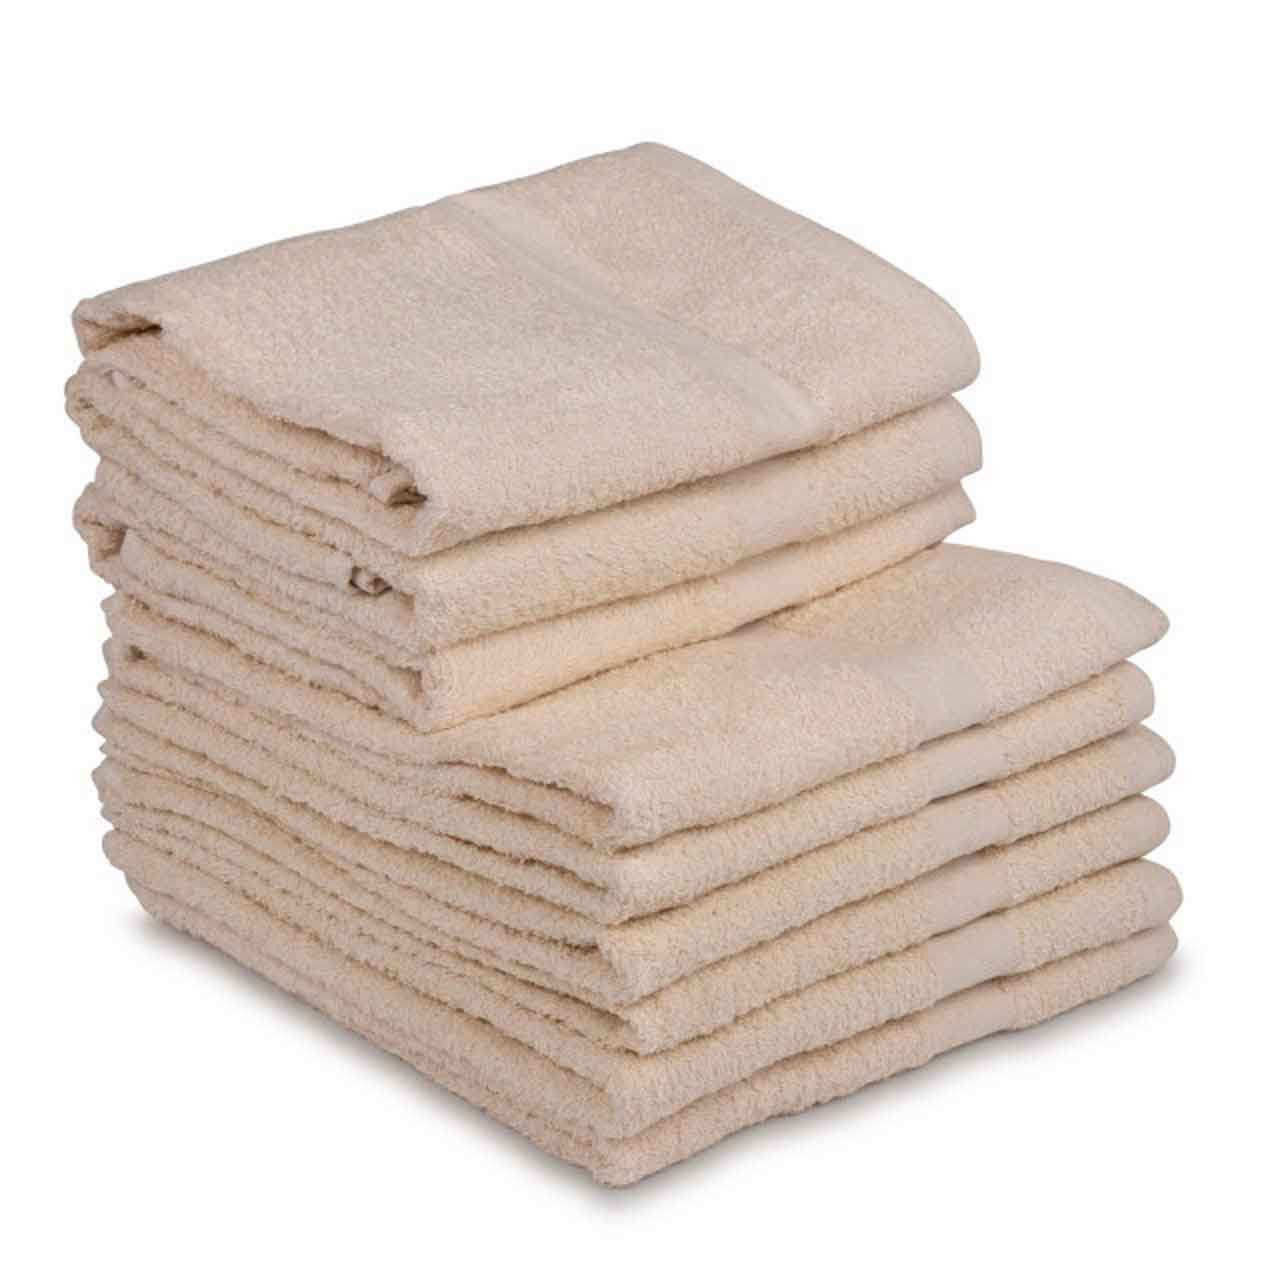 Is the material of these ecru towels high-quality?